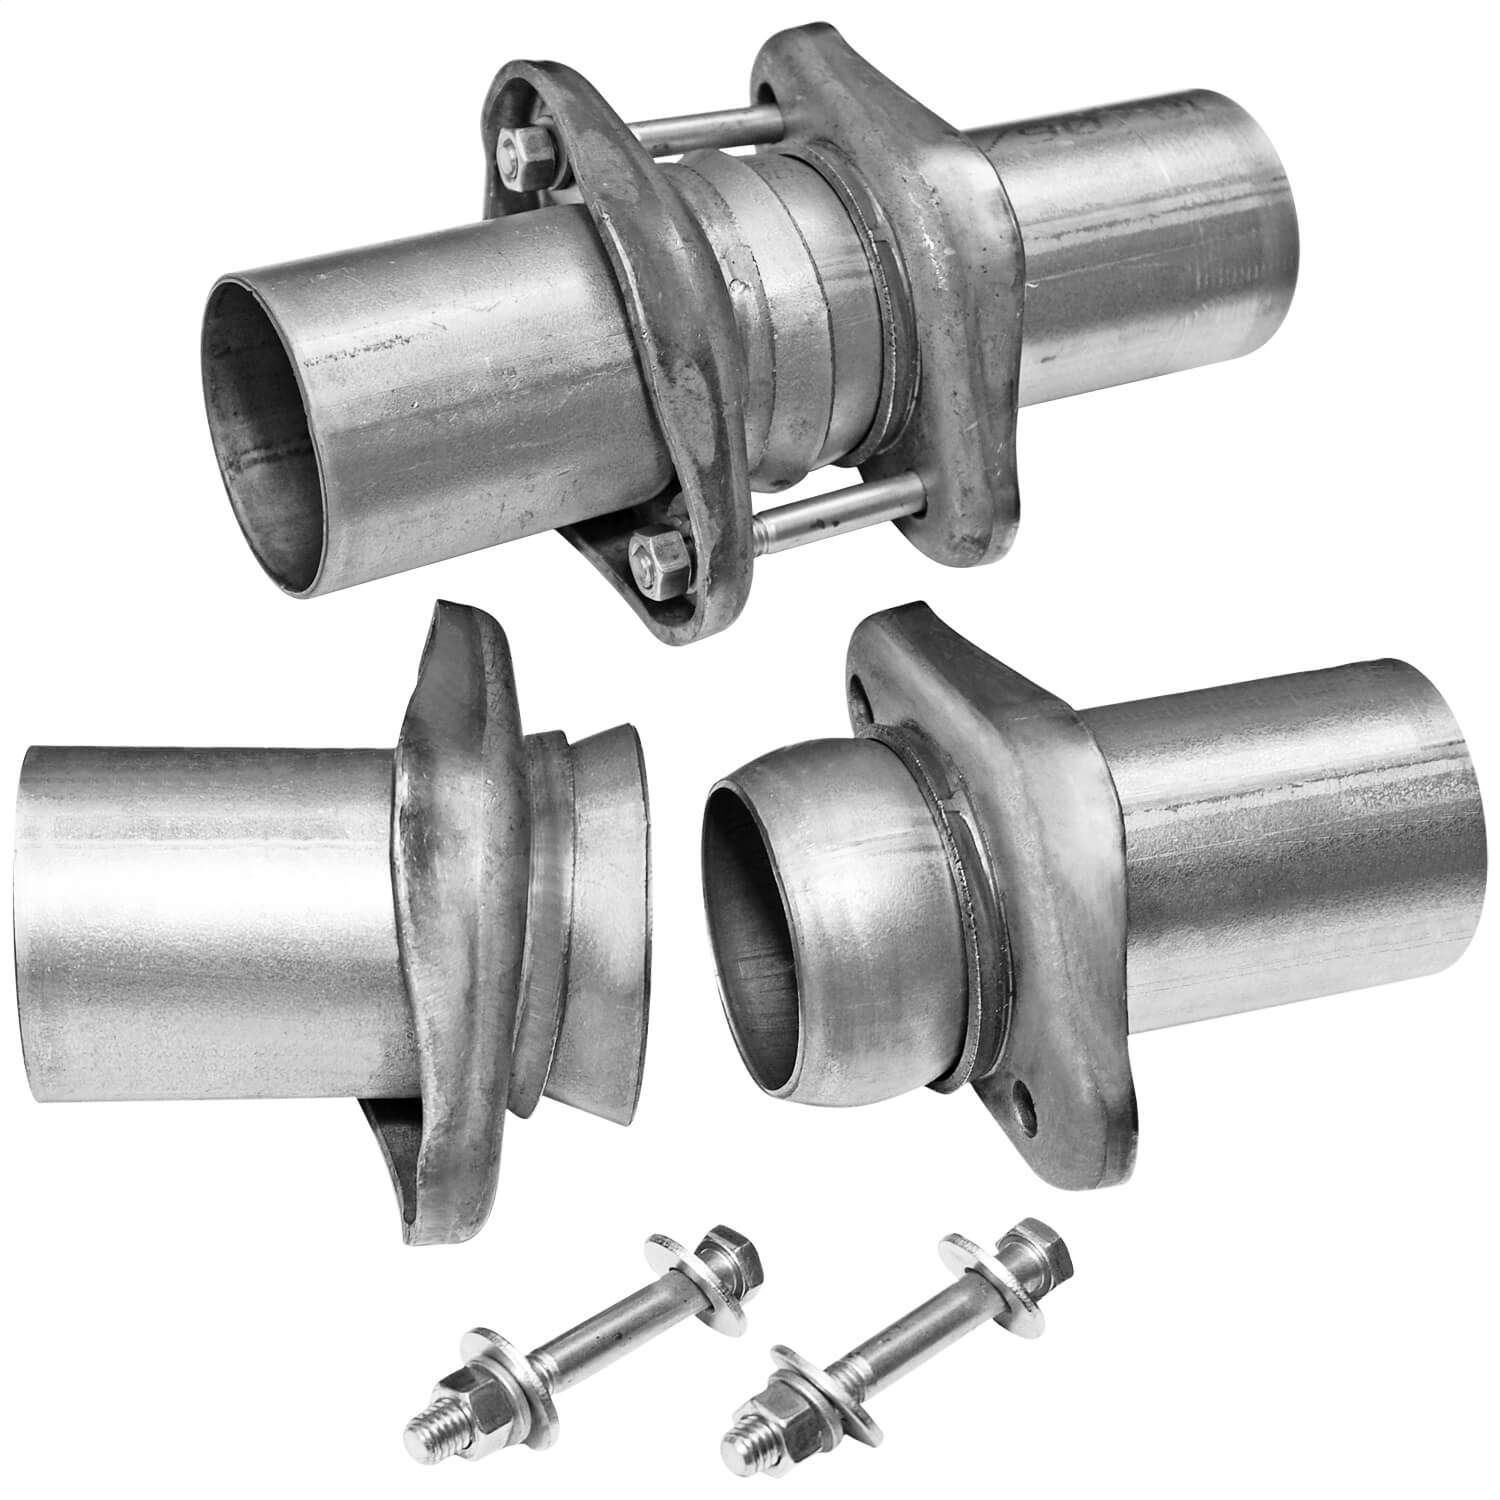 Ball Flange Header Collector Kit 2.5 to 2.5 - 15938